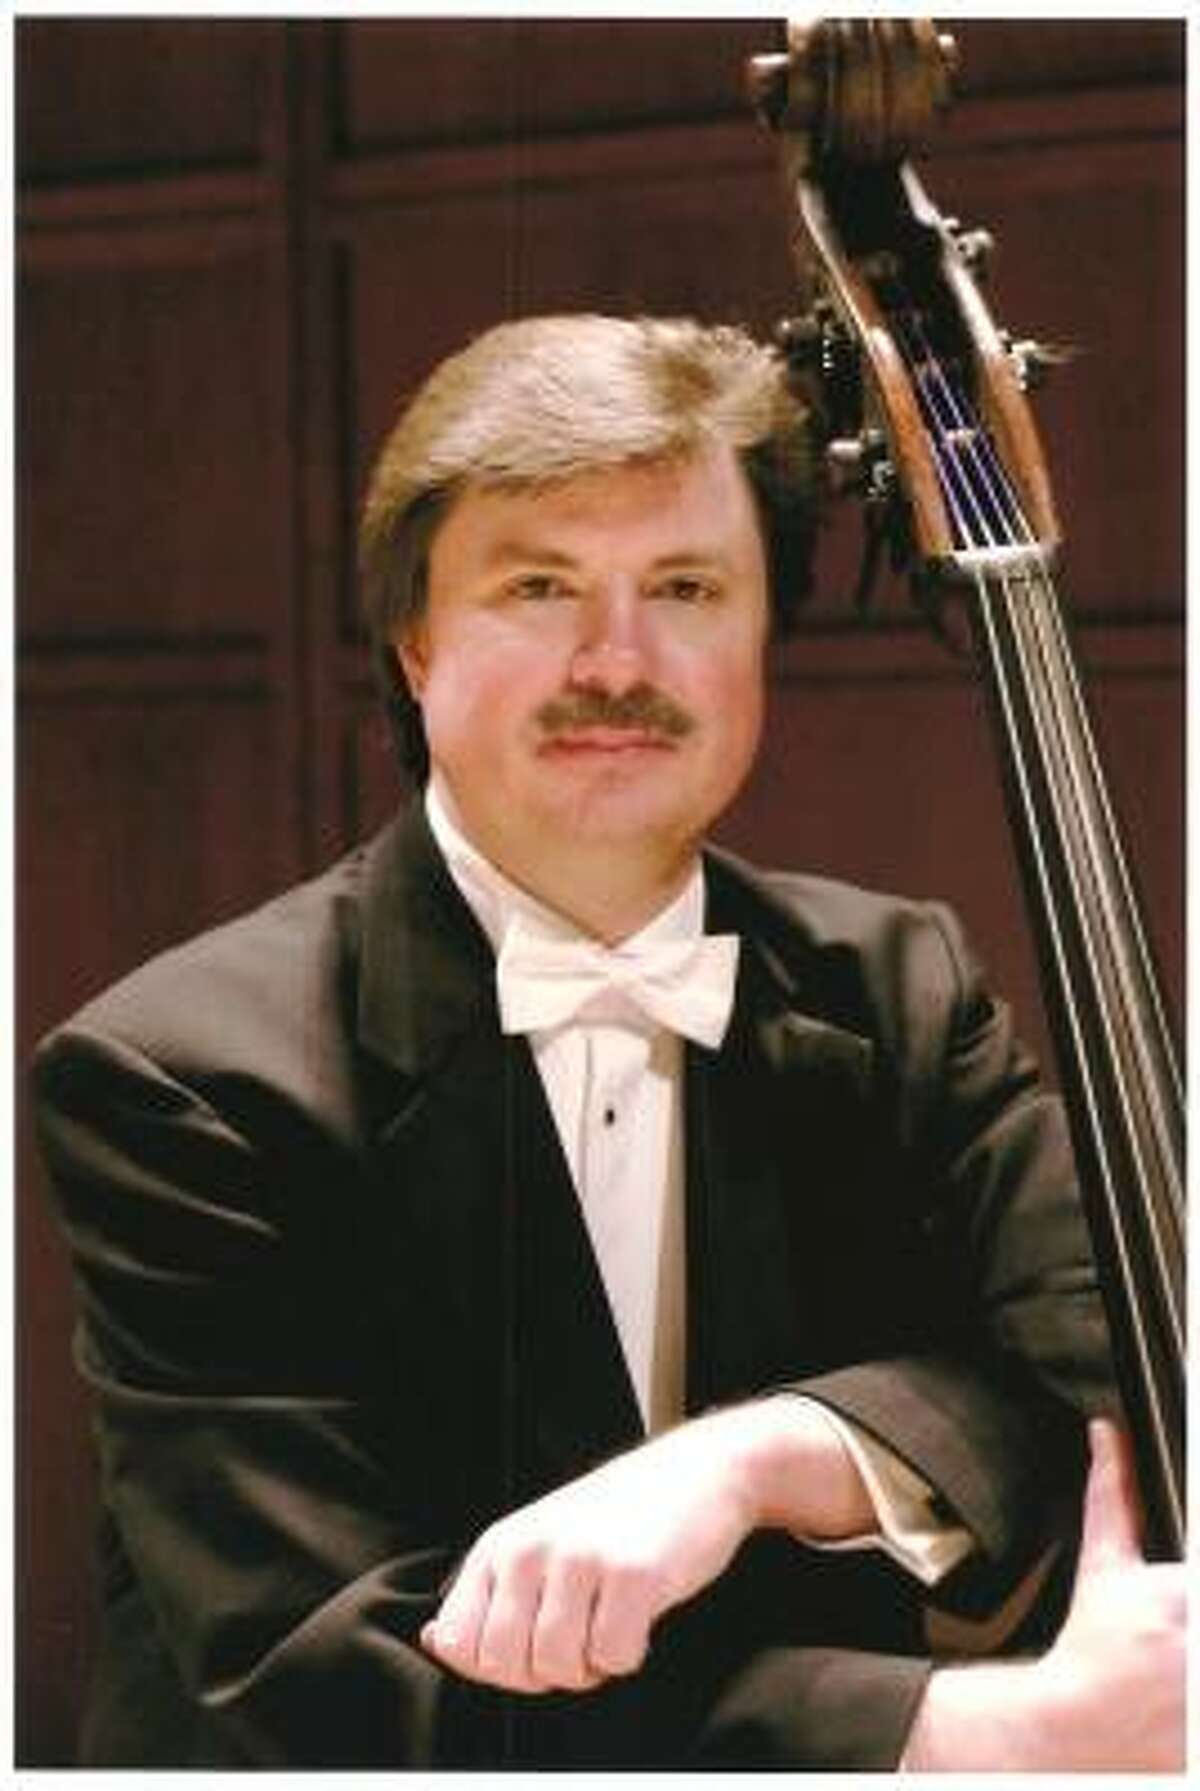 Bruce Ridge, conference chairman and a bass player in the Raleigh's North Carolina Symphony.